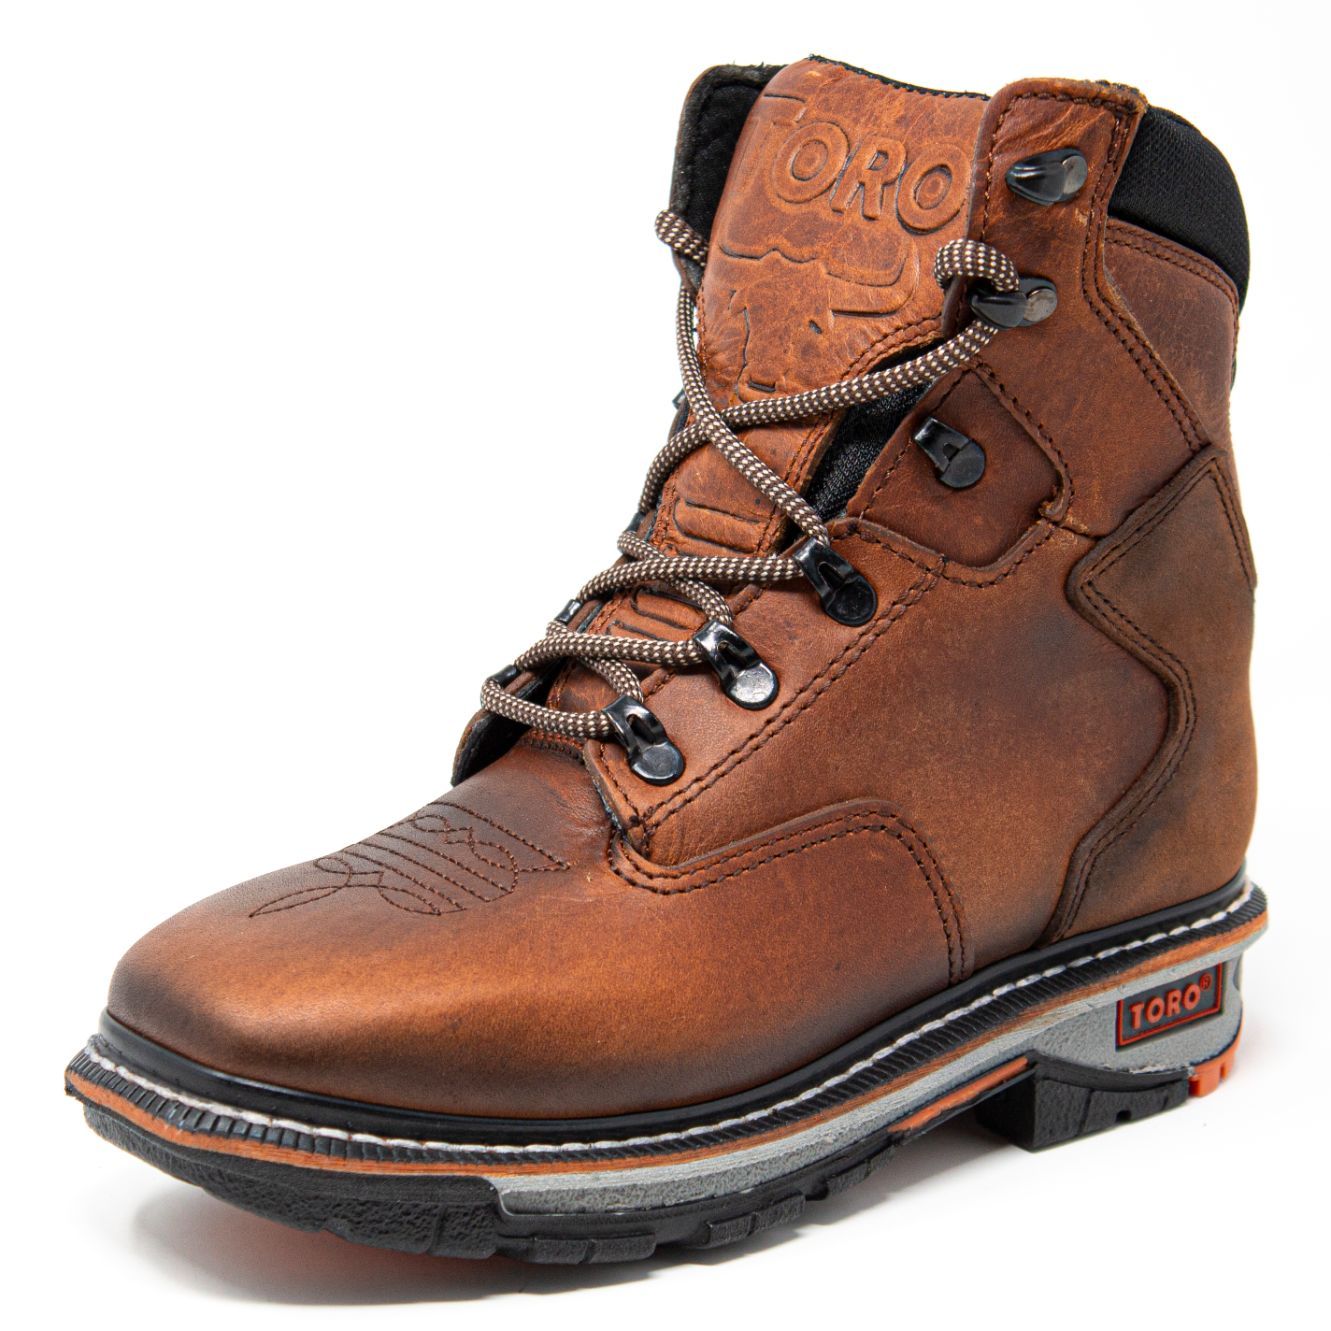 Women's Work Boots - 3-Layer Sole & Soft Toe - Tan Work Boots - Toro Bravo - 8" Work Boots - Tan 8in Work Boots